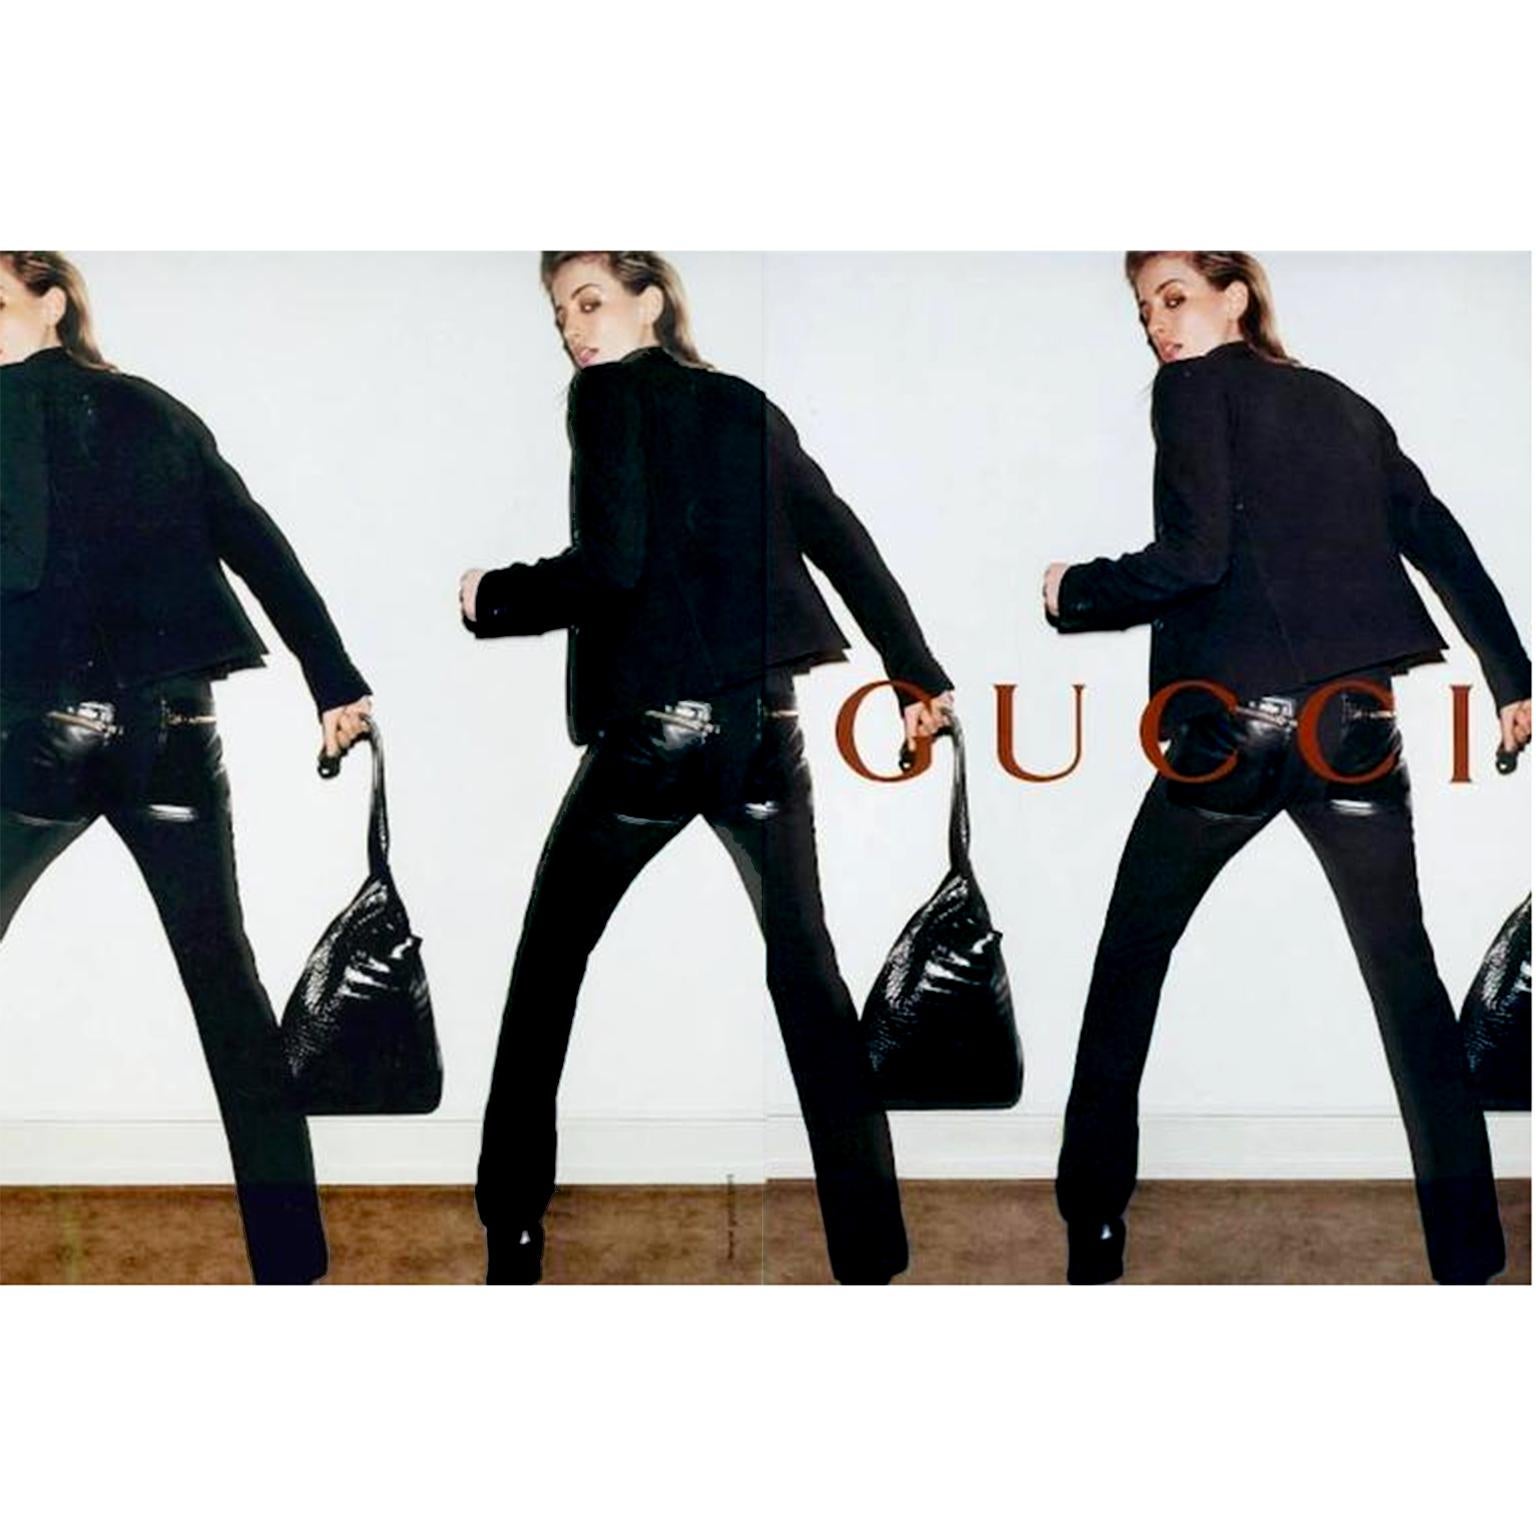 These fabulous Tom Ford For Gucci FW 2001 black wool pants have leather trim and multiple zippers! These were featured in the major Gucci ad campaign in 2001 and on the Gucci runway that year. These iconic pants and were a very important part of the